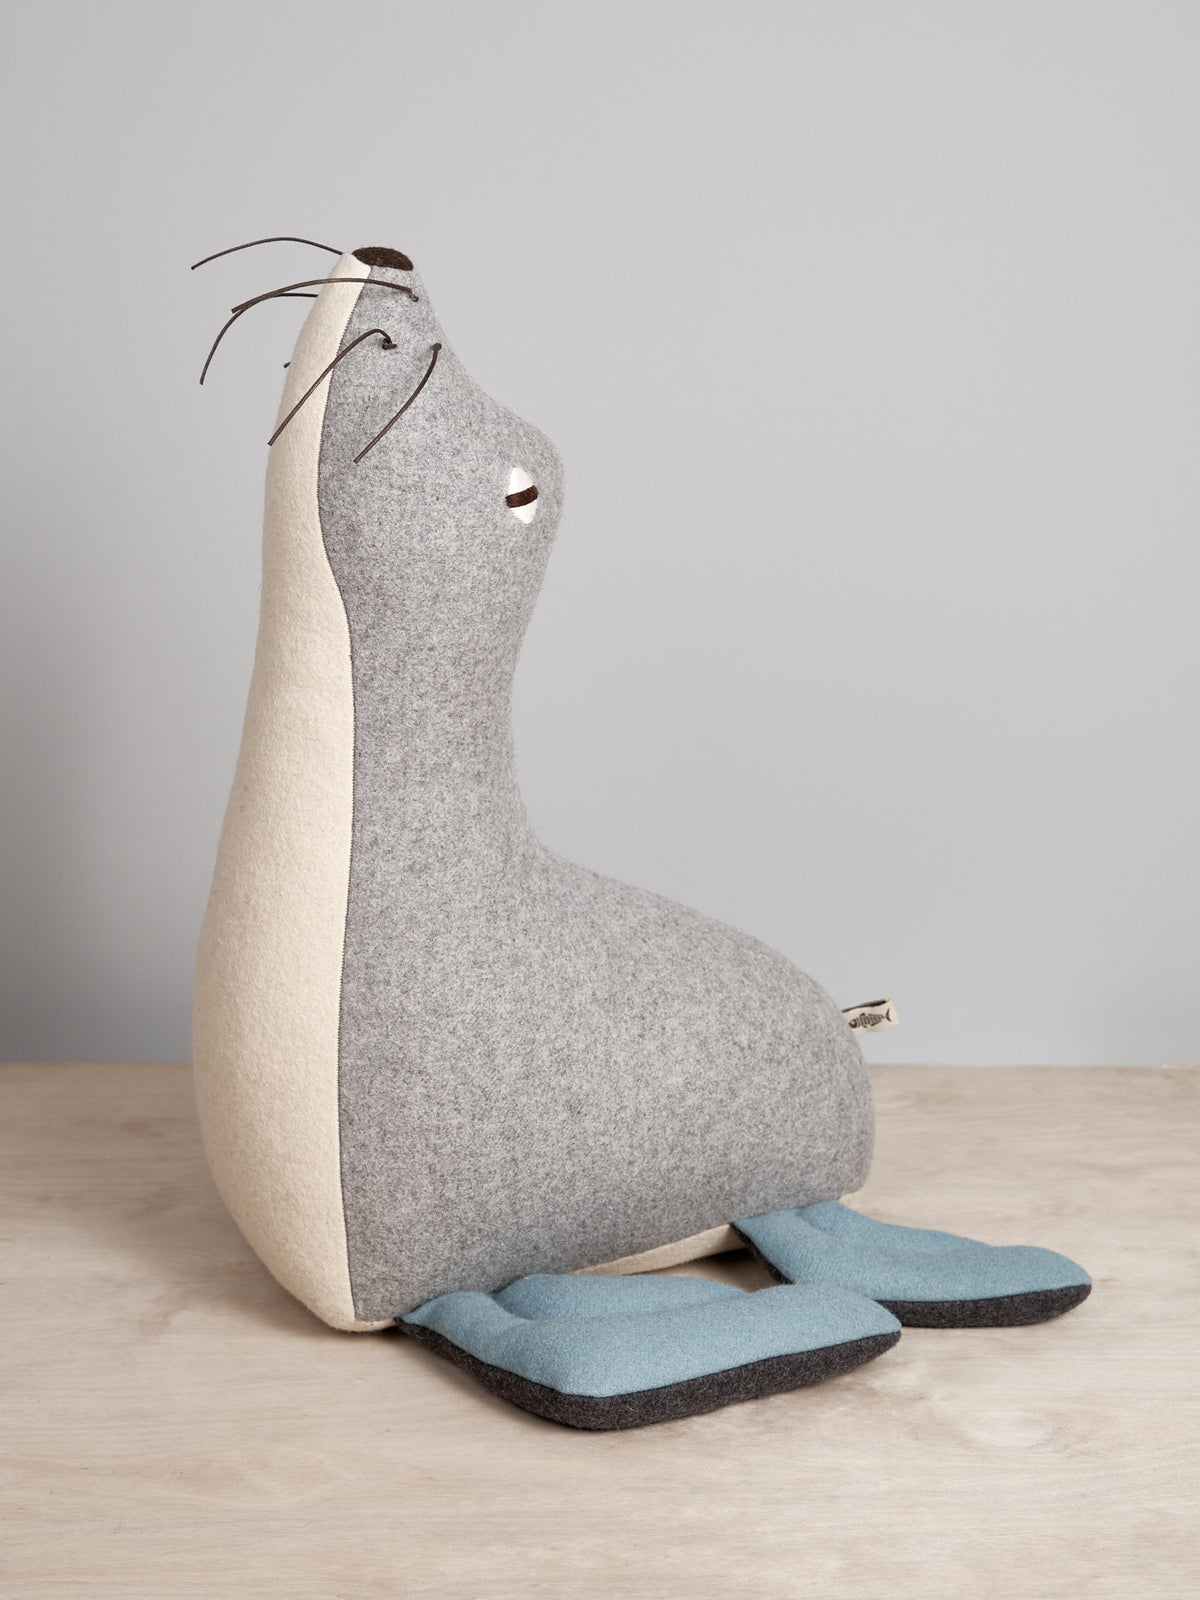 A grey and blue KALI, the Antarctic Fur Seal stuffed animal sitting on a table. (Brand: Carapau)